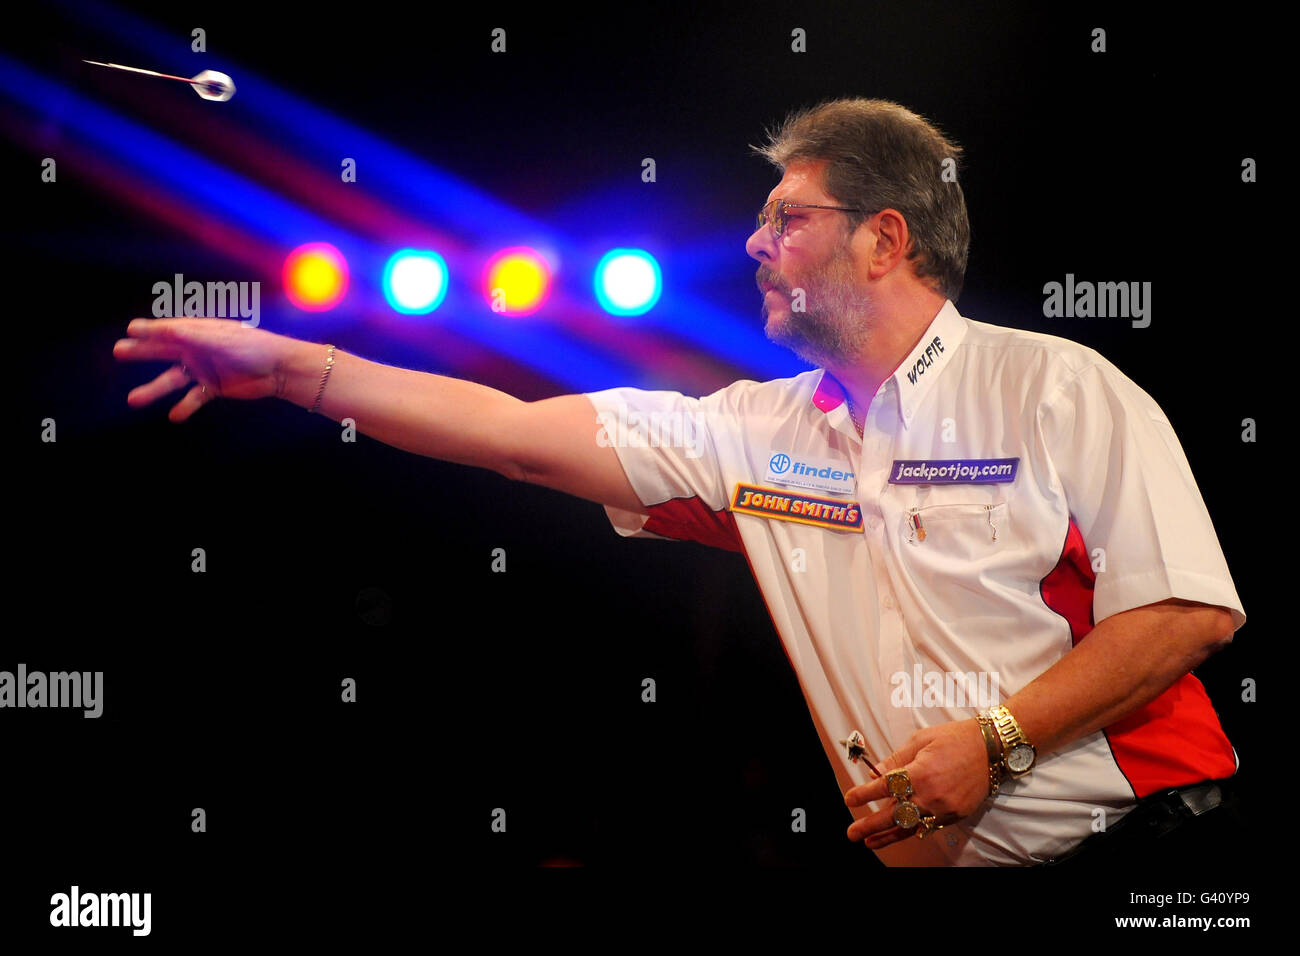 England's Martin Adams in action during his final against England's Dean Winstanley during the BDO World Professional Darts Championship at the Lakeside Complex, Surrey. Stock Photo